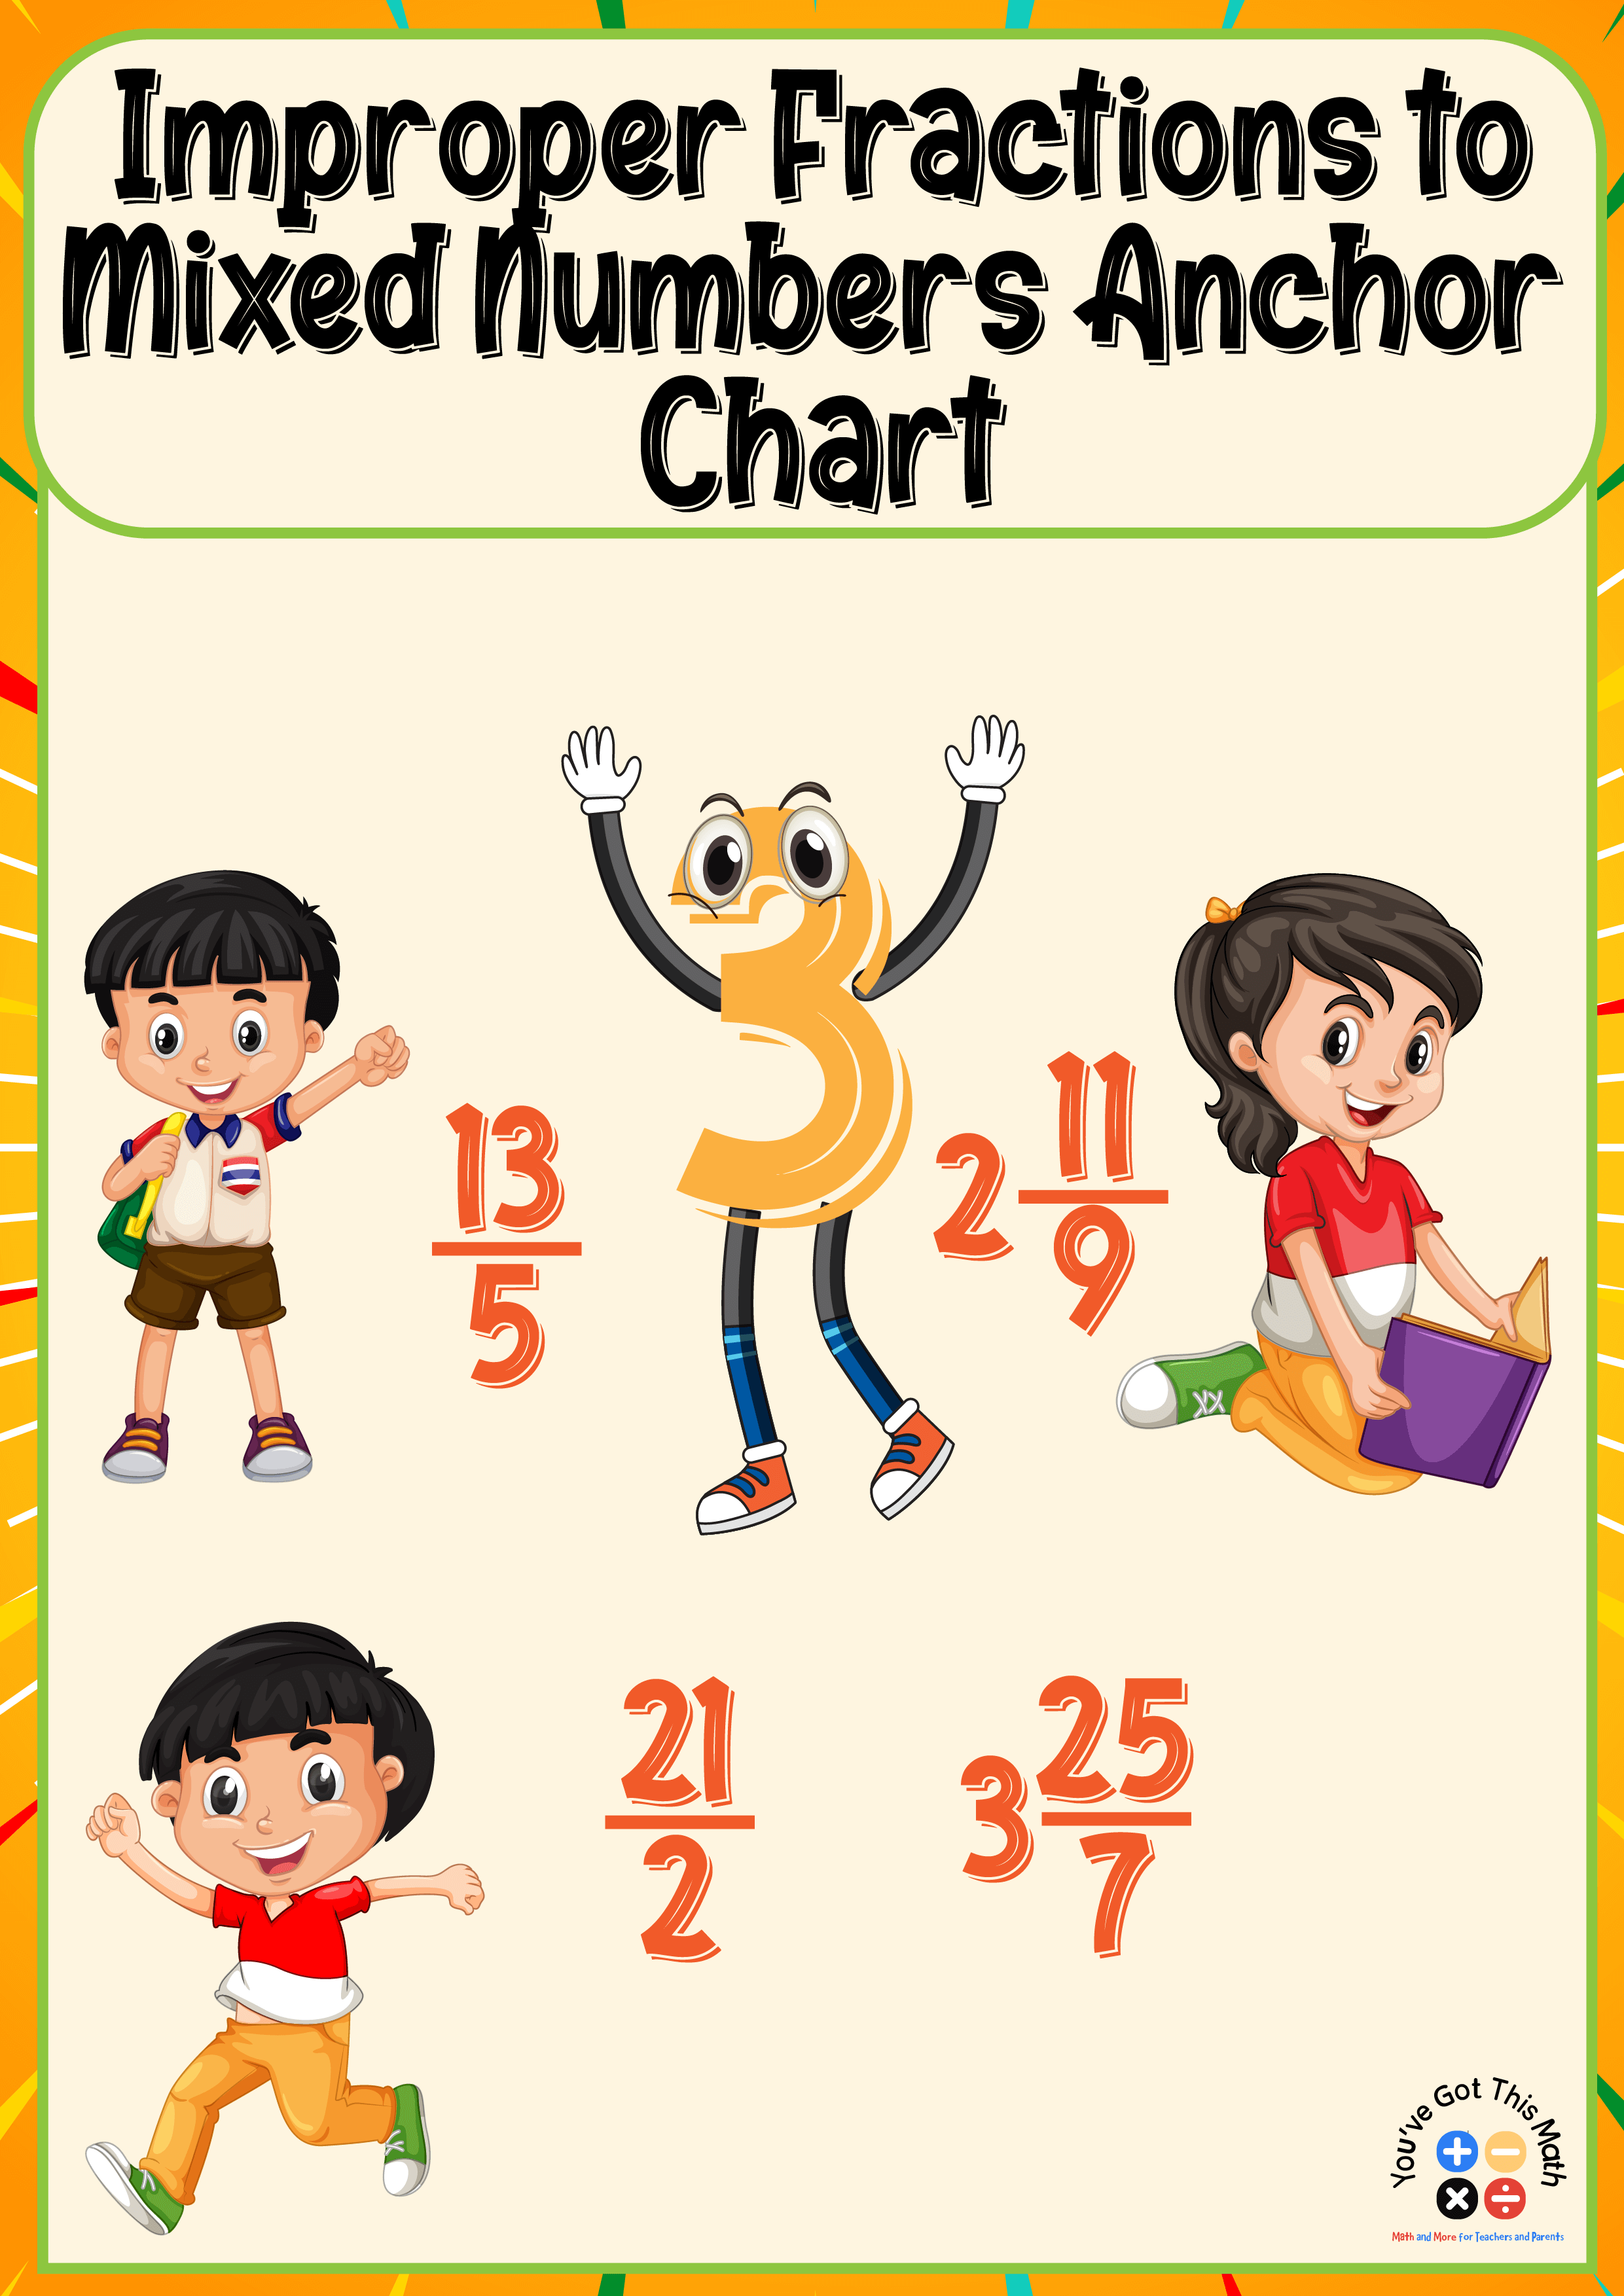  improper fractions to mixed numbers anchor chart overview